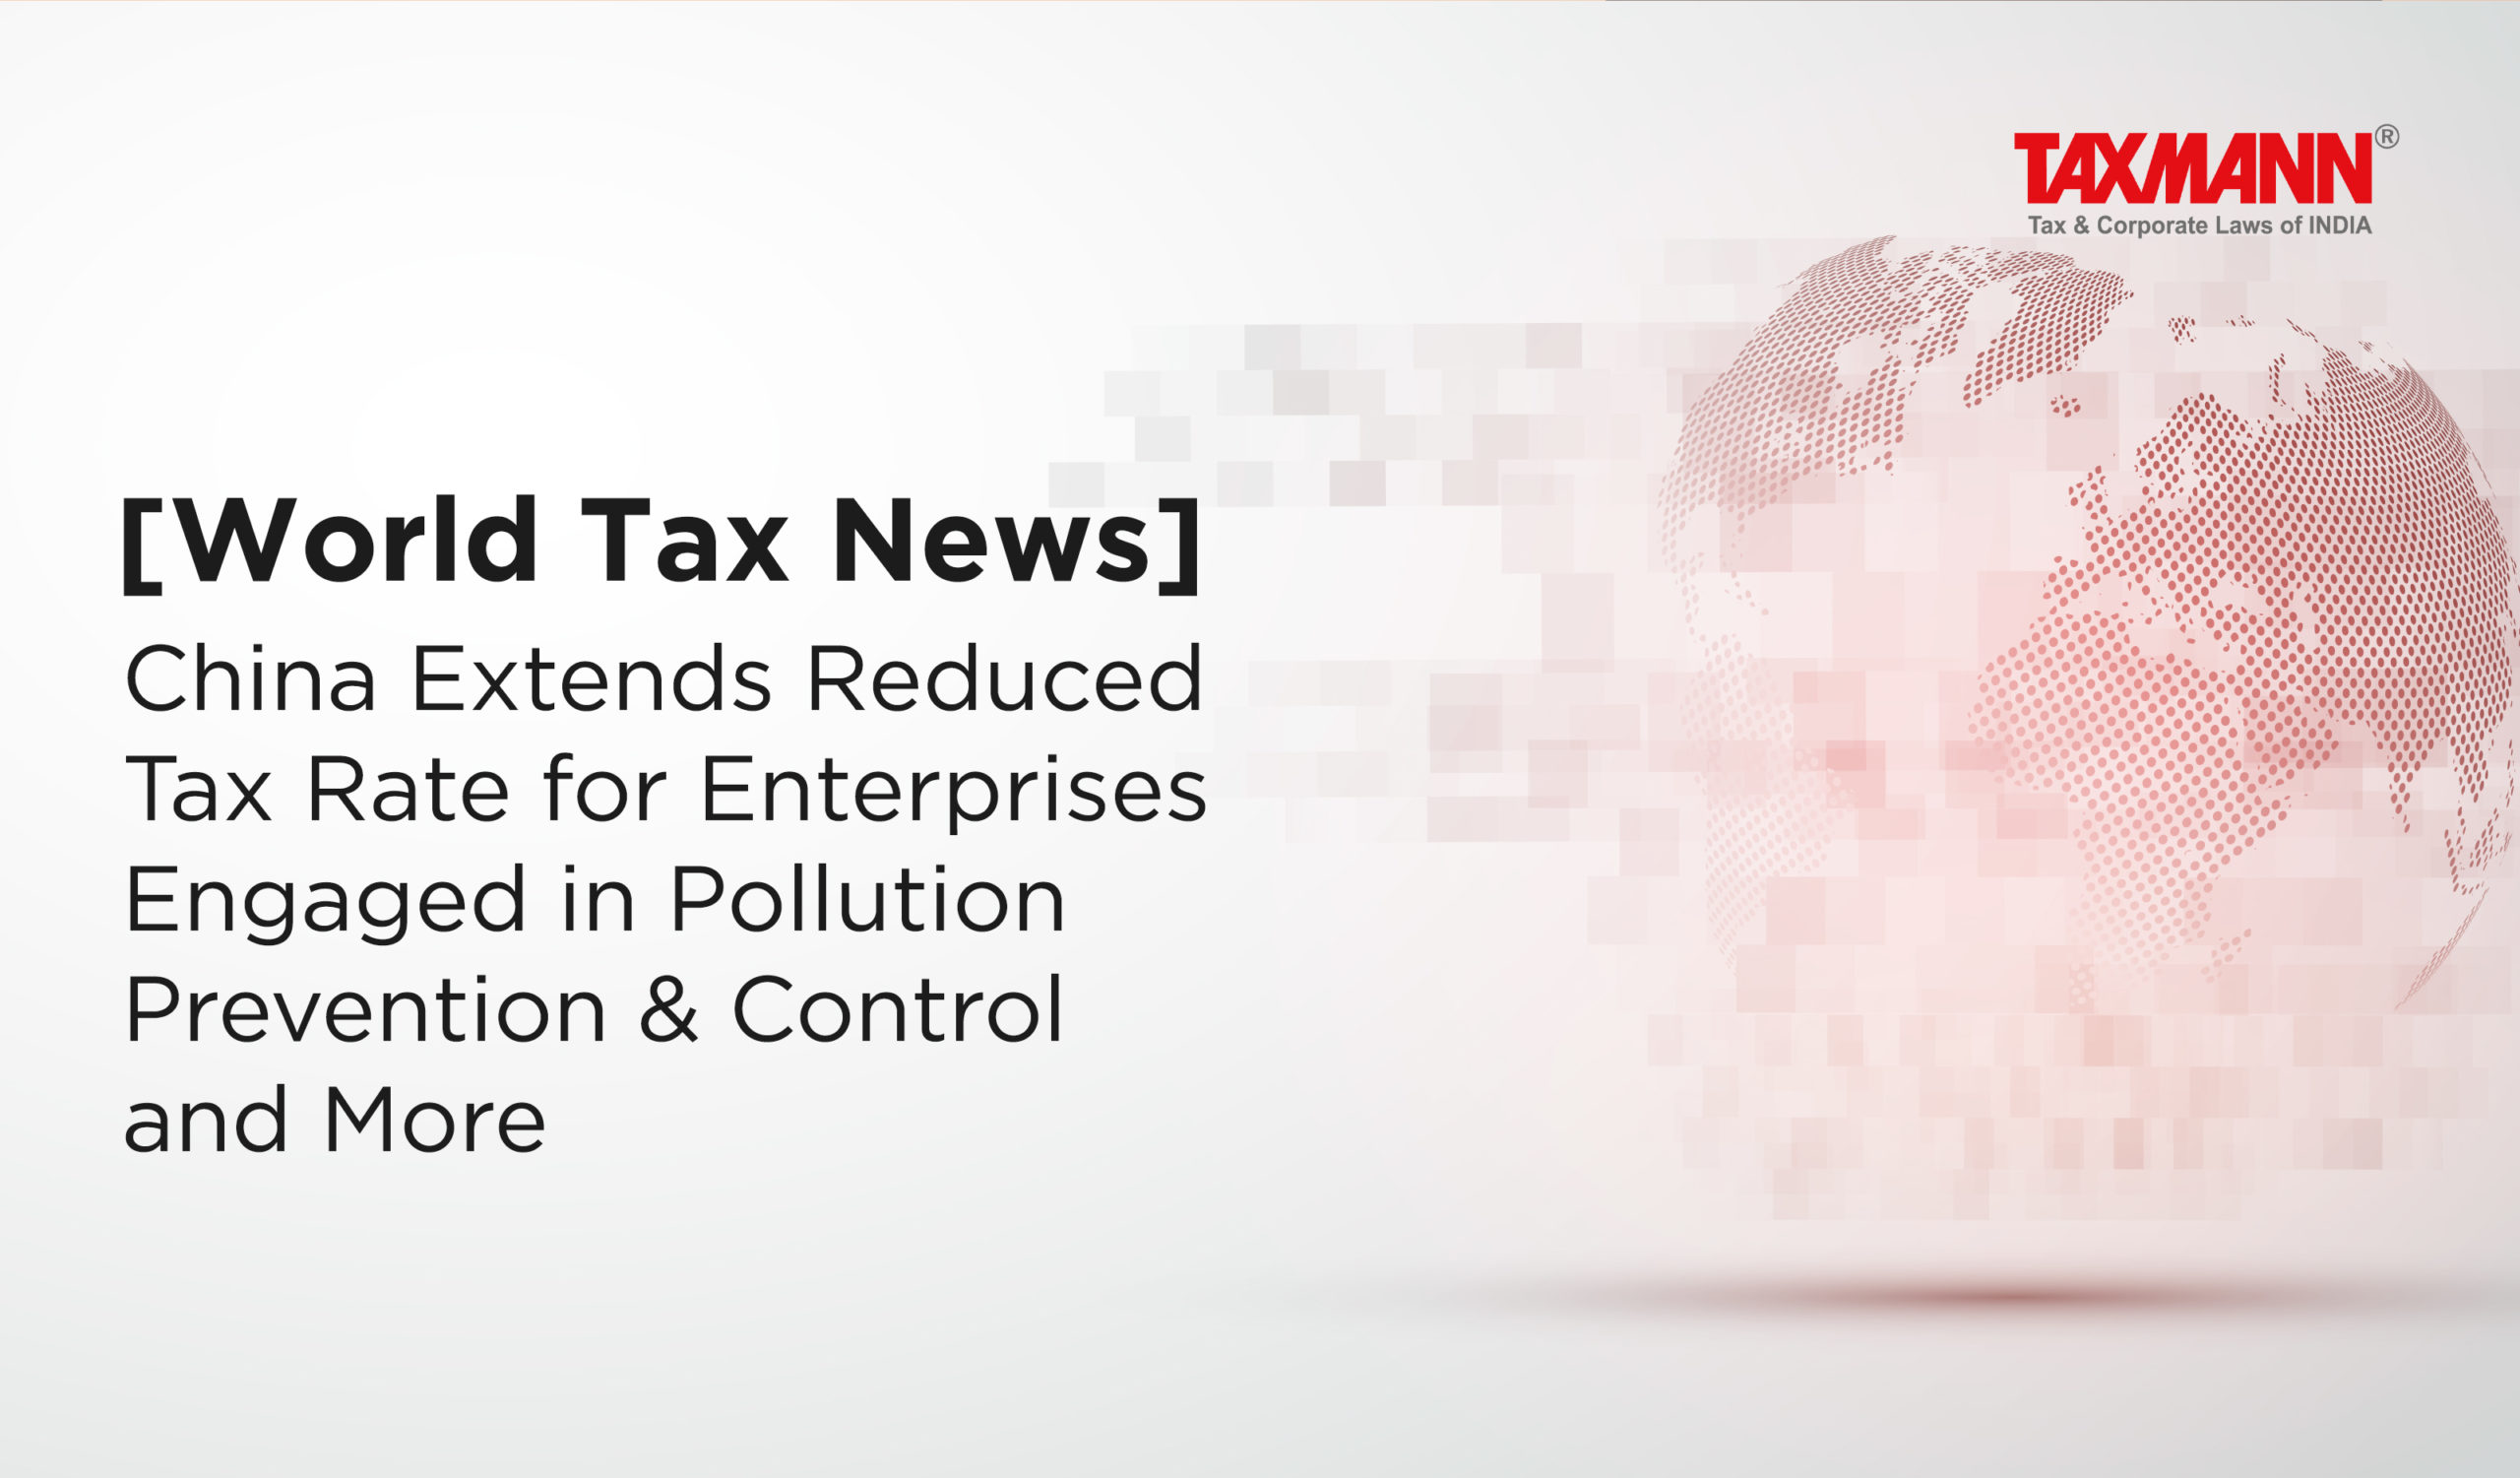 China's tax rate for enterprises engaged in pollution prevention